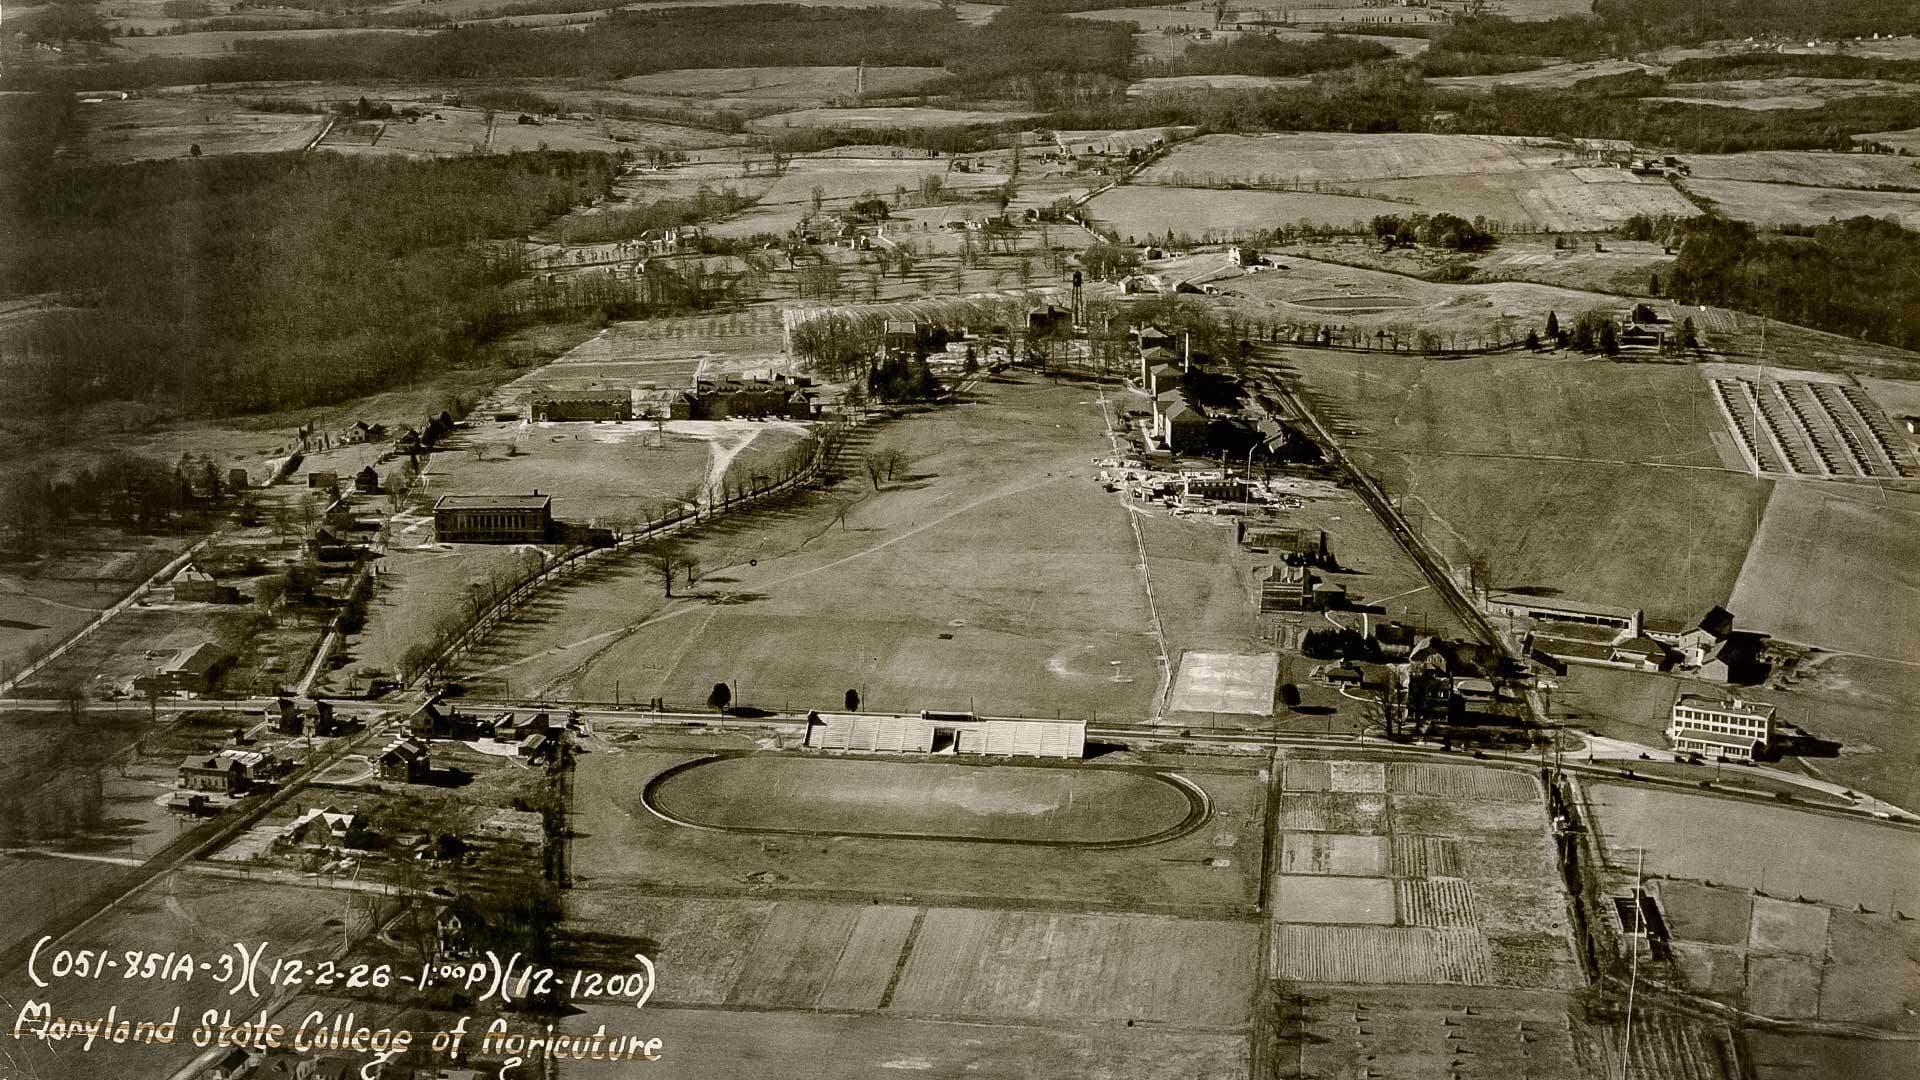 1926 aerial view of campus